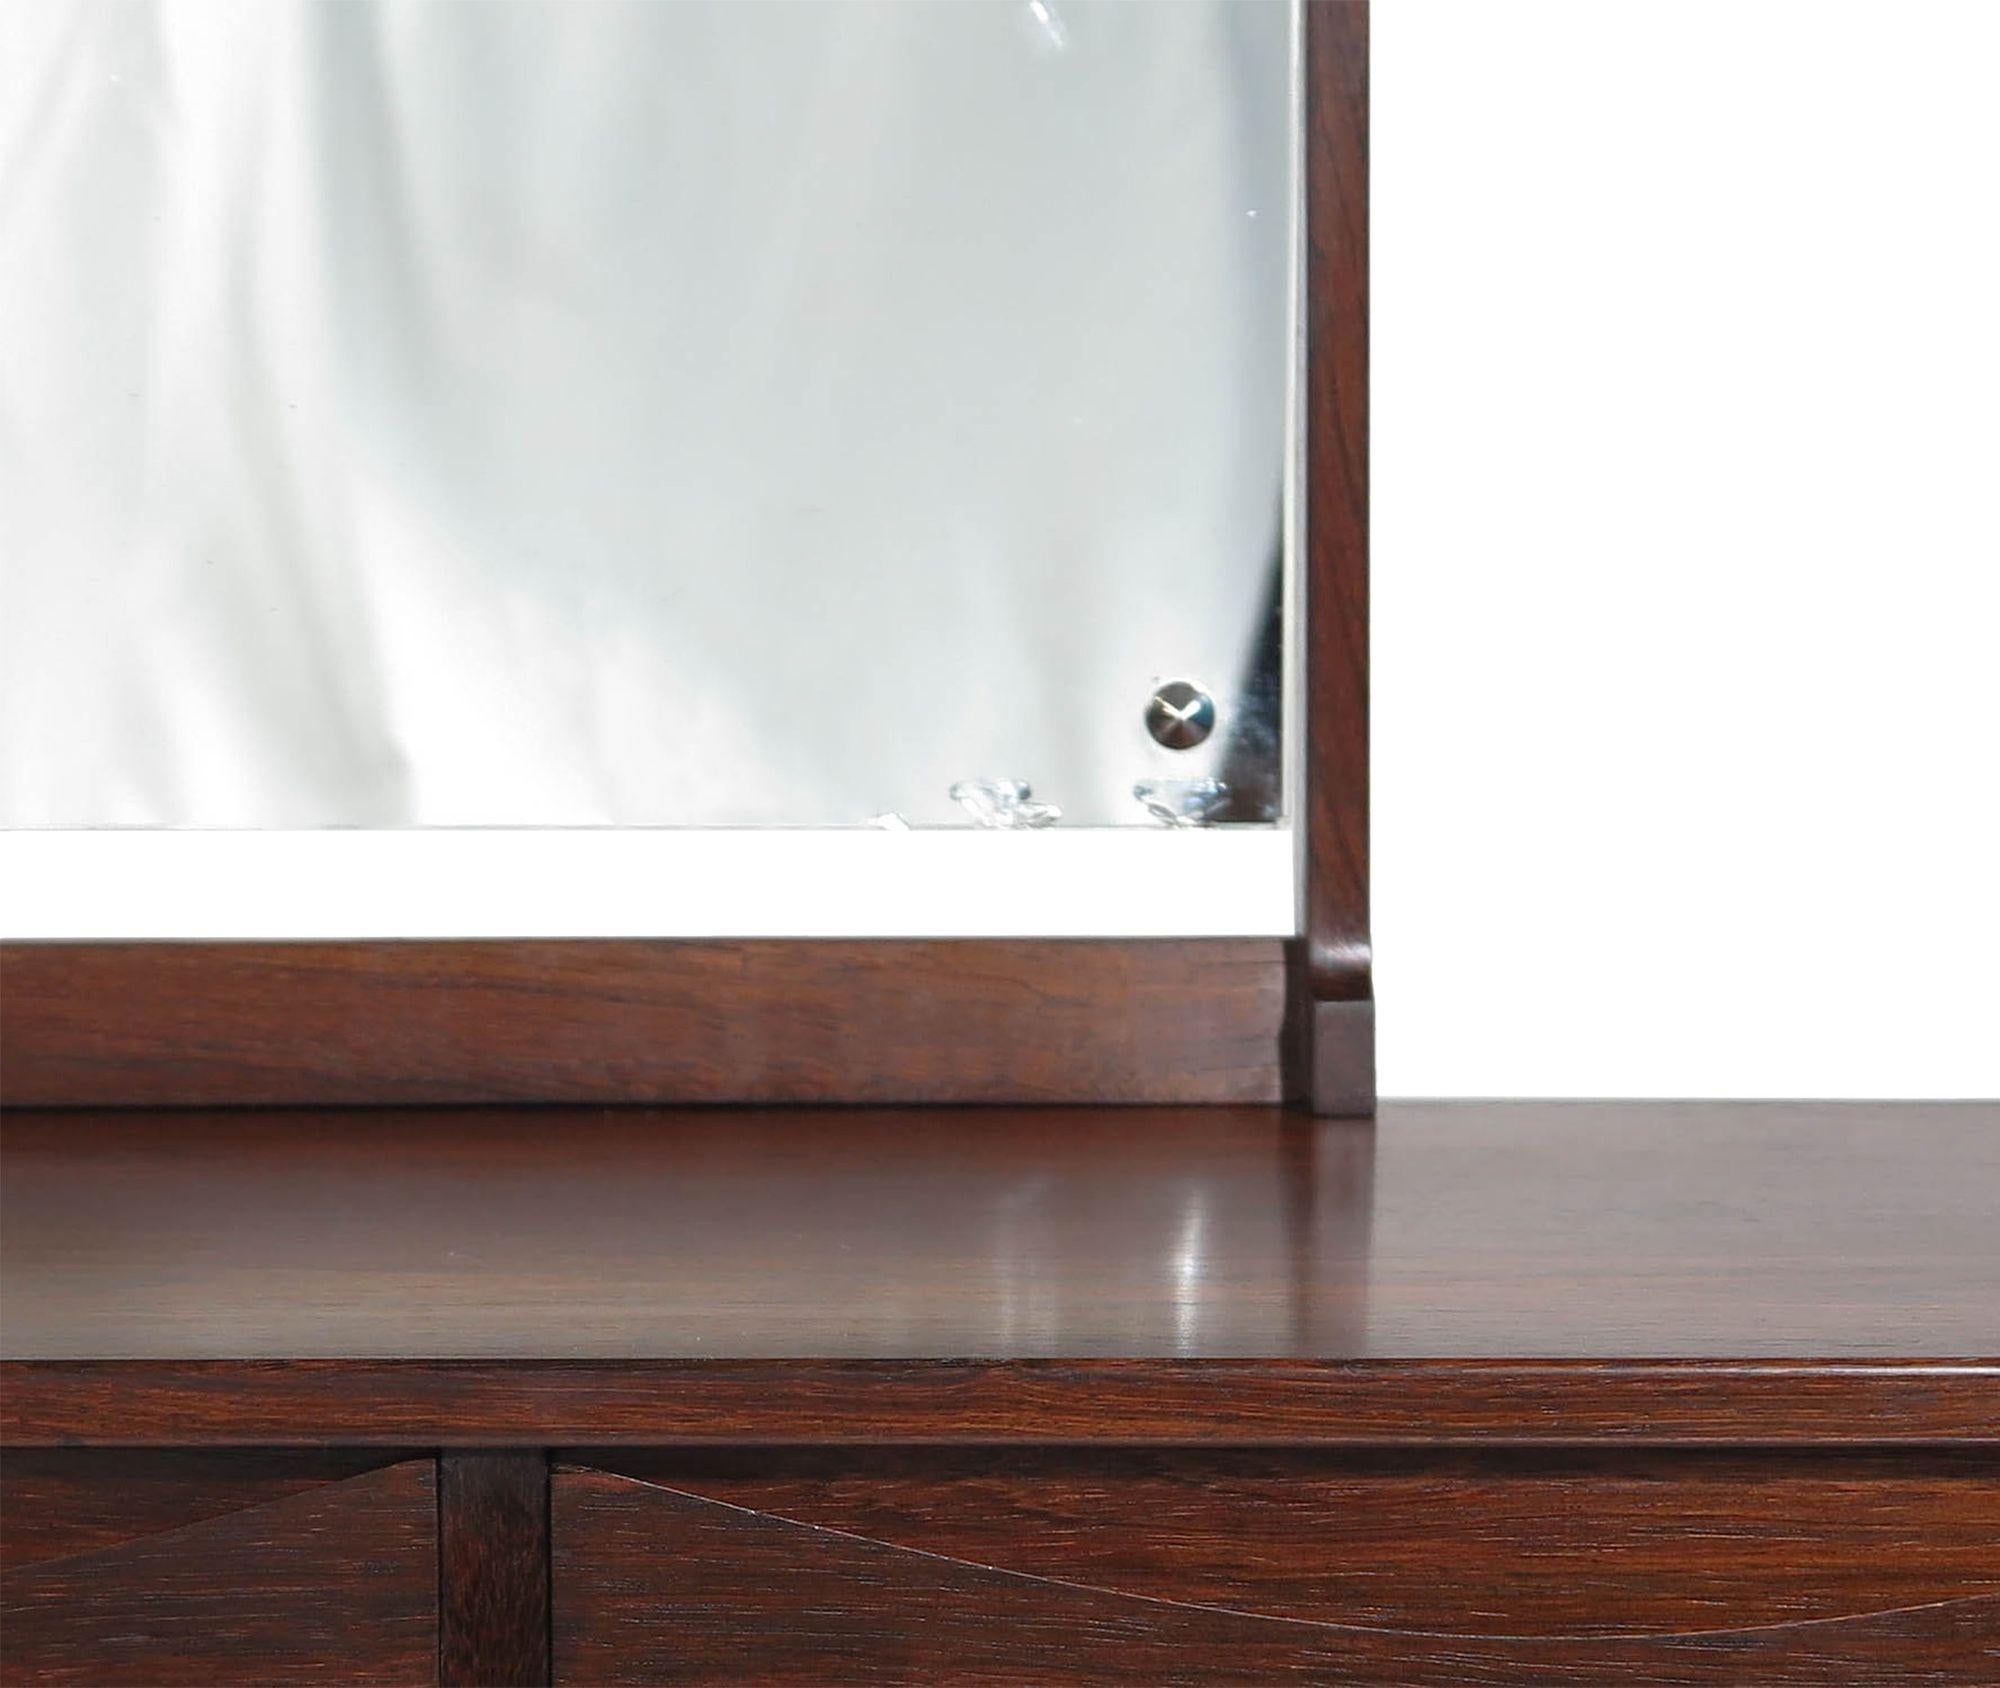 Brazilian rosewood vanity by Niels Clausen, 1958, Denmark. This petite vanity with tilting mirror is crafted of beautifully grained Brazilian rosewood with a raised edge, two pull-out drawers with half-moon-shaped carved handles, and a mirror. The